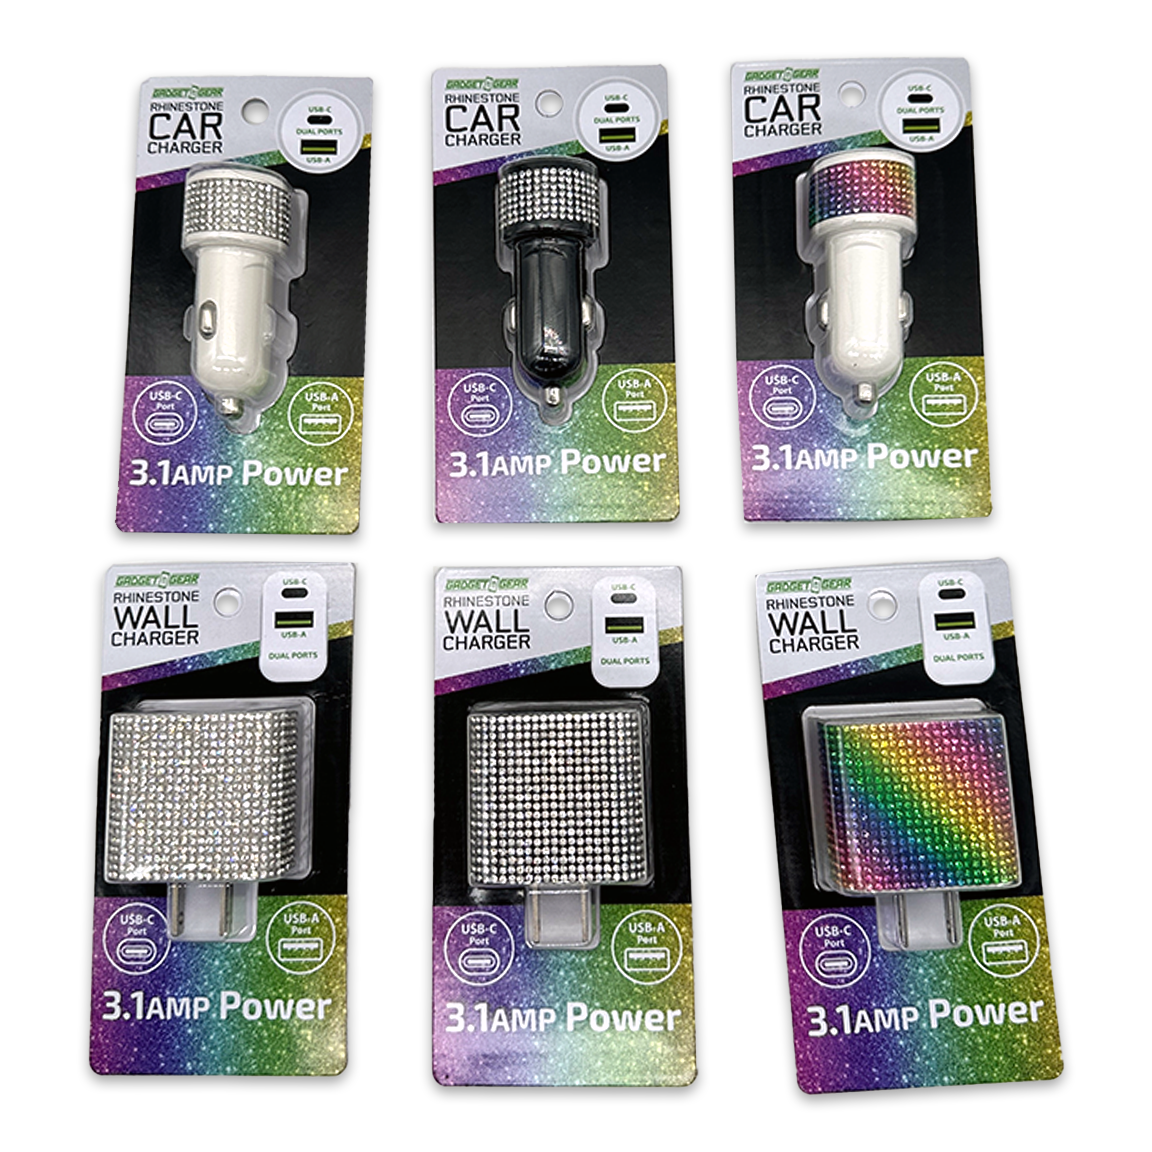 WHOLESALE RHINESTONE AC DC DUAL CHARGER VARIETY 6 PIECES PER DISPLAY 88502